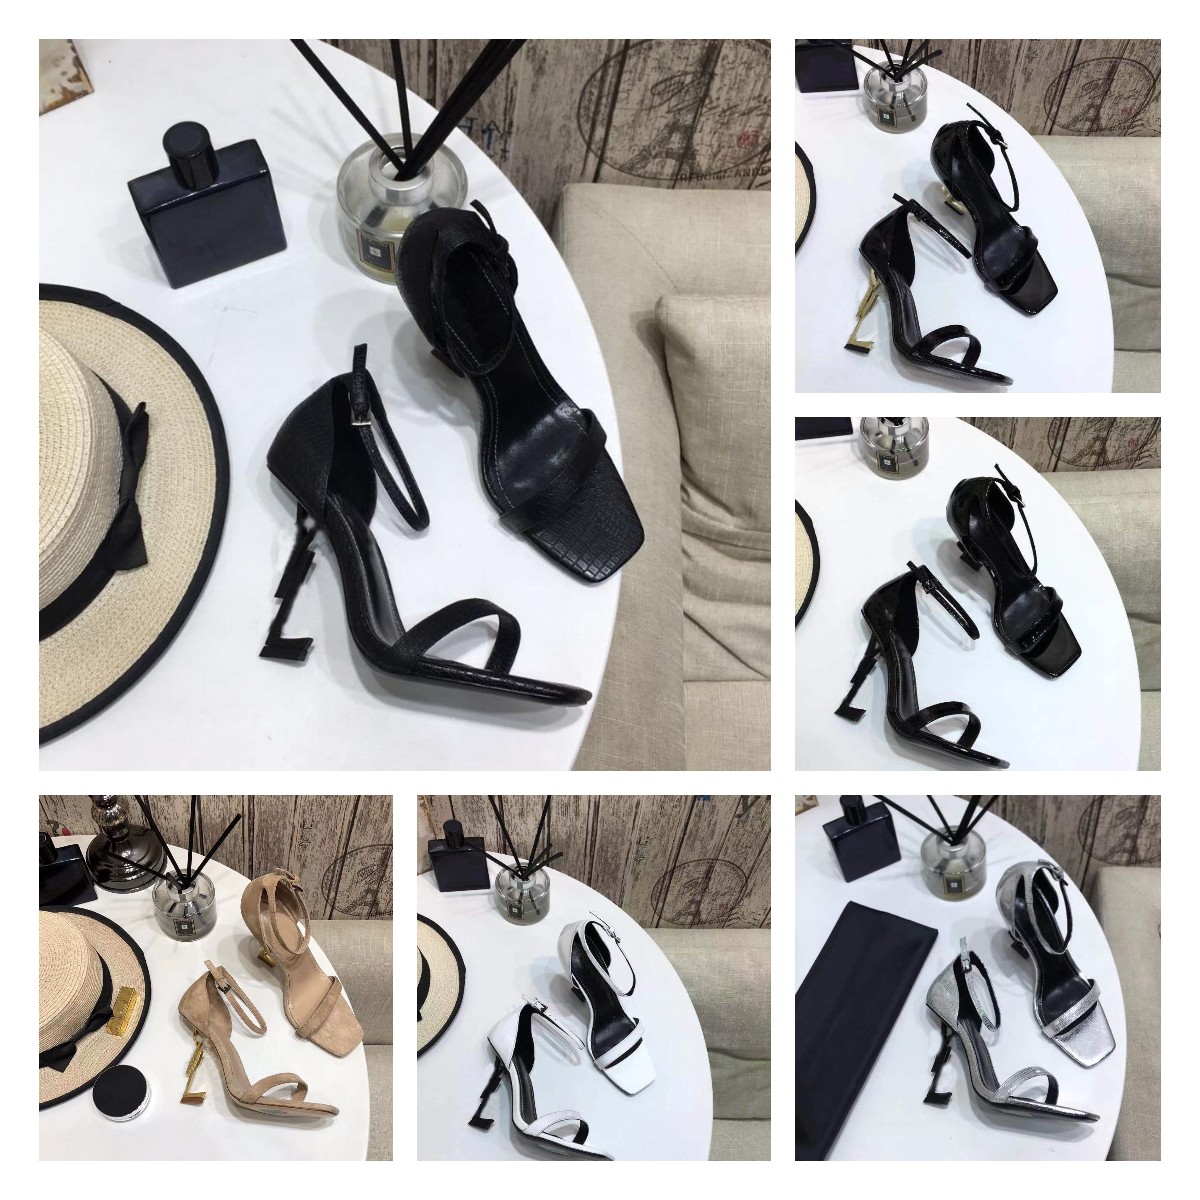 

2021 Luxury Designer Women Sandals OPYUM leather high heels metal heel adjustable ankle straps Fashion Top Quality With Box Size 35-4, Color 5